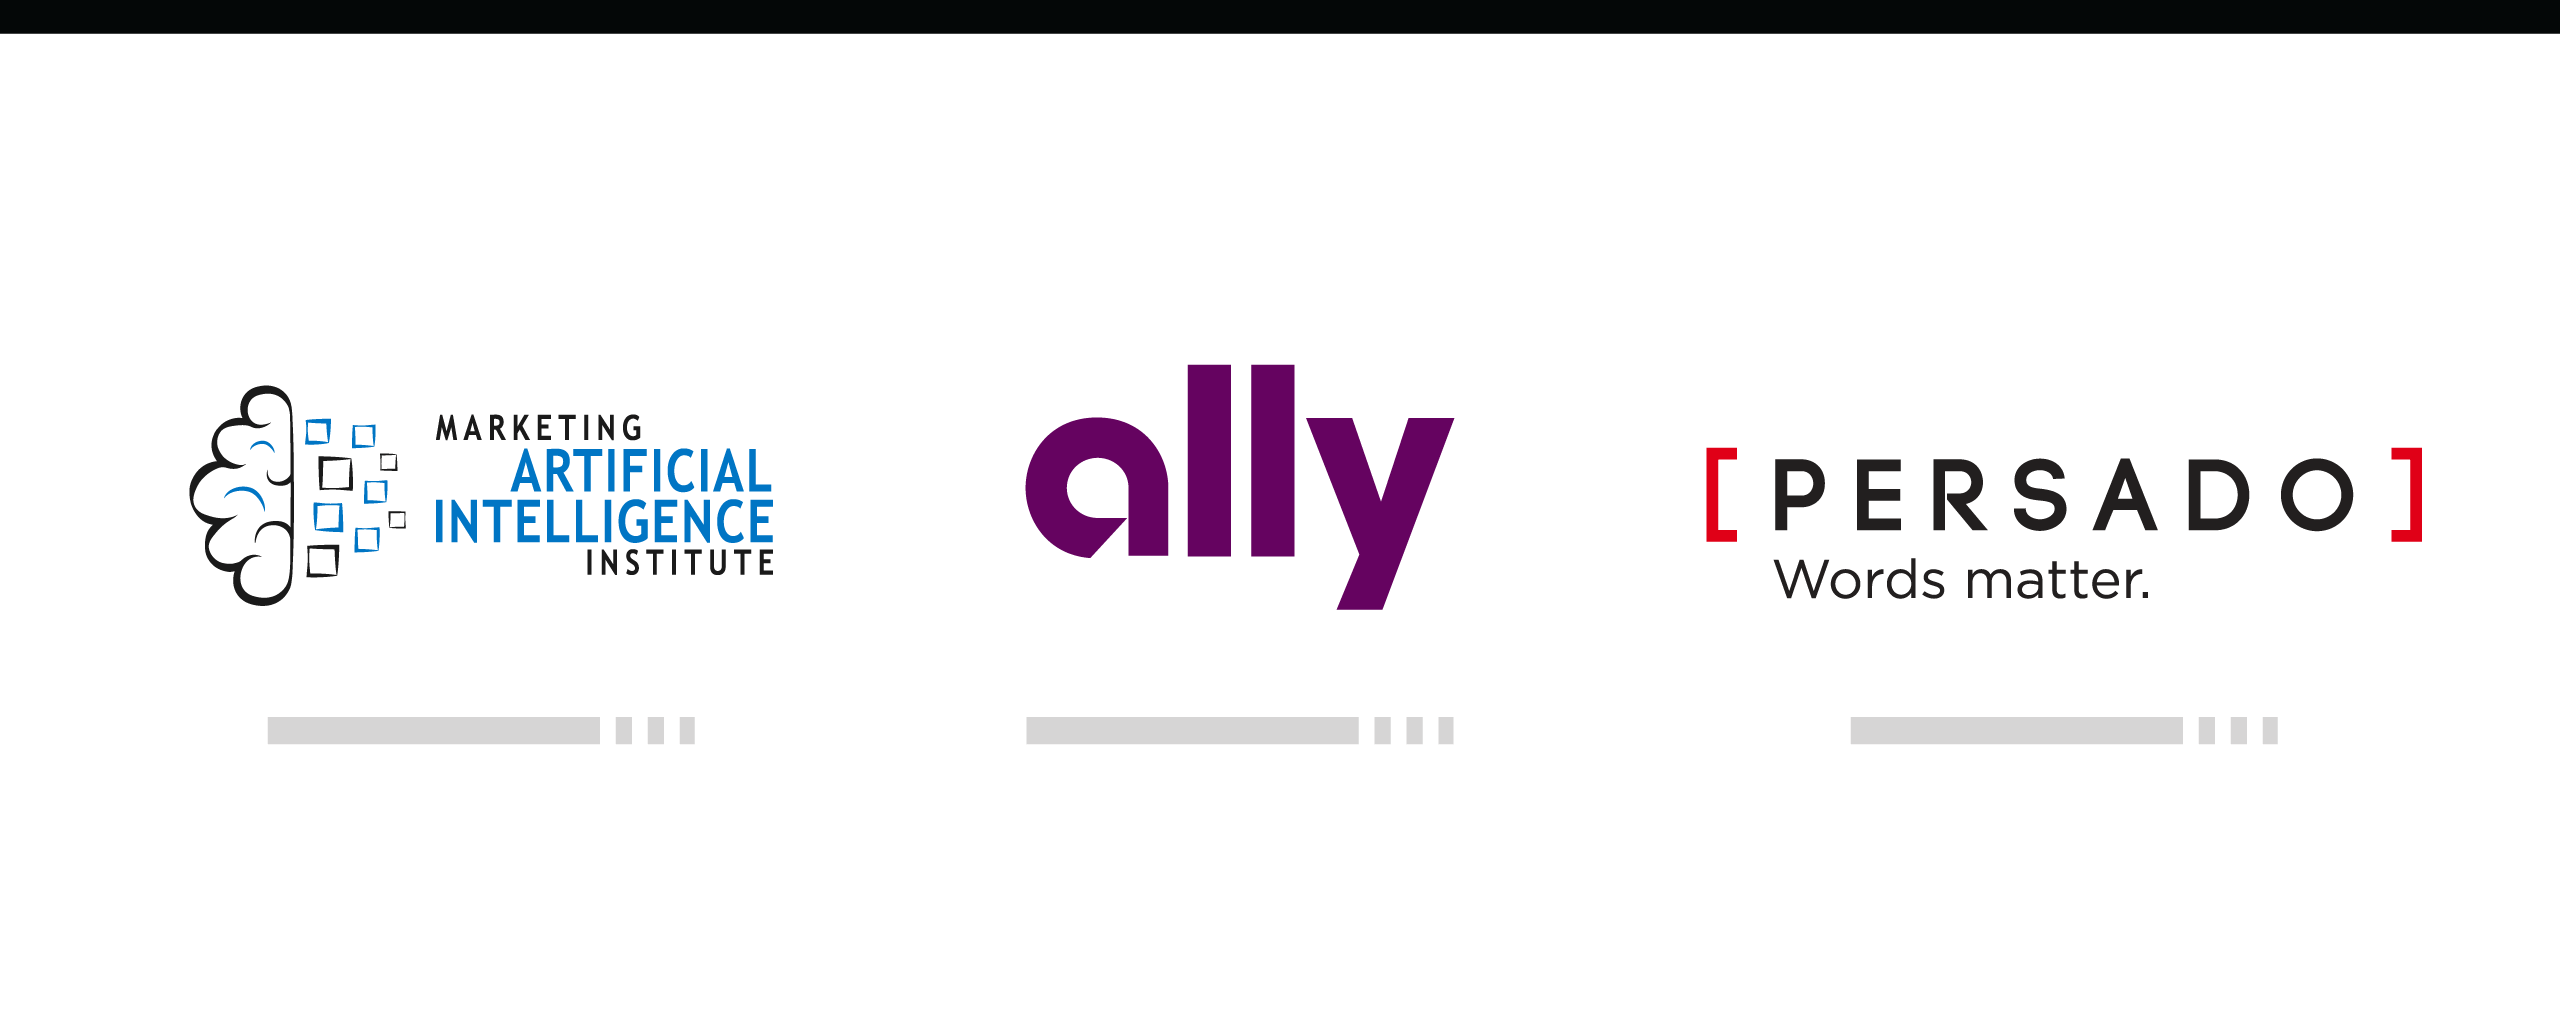 Ally Financial’s CMO Uses AI to Further Innovation post